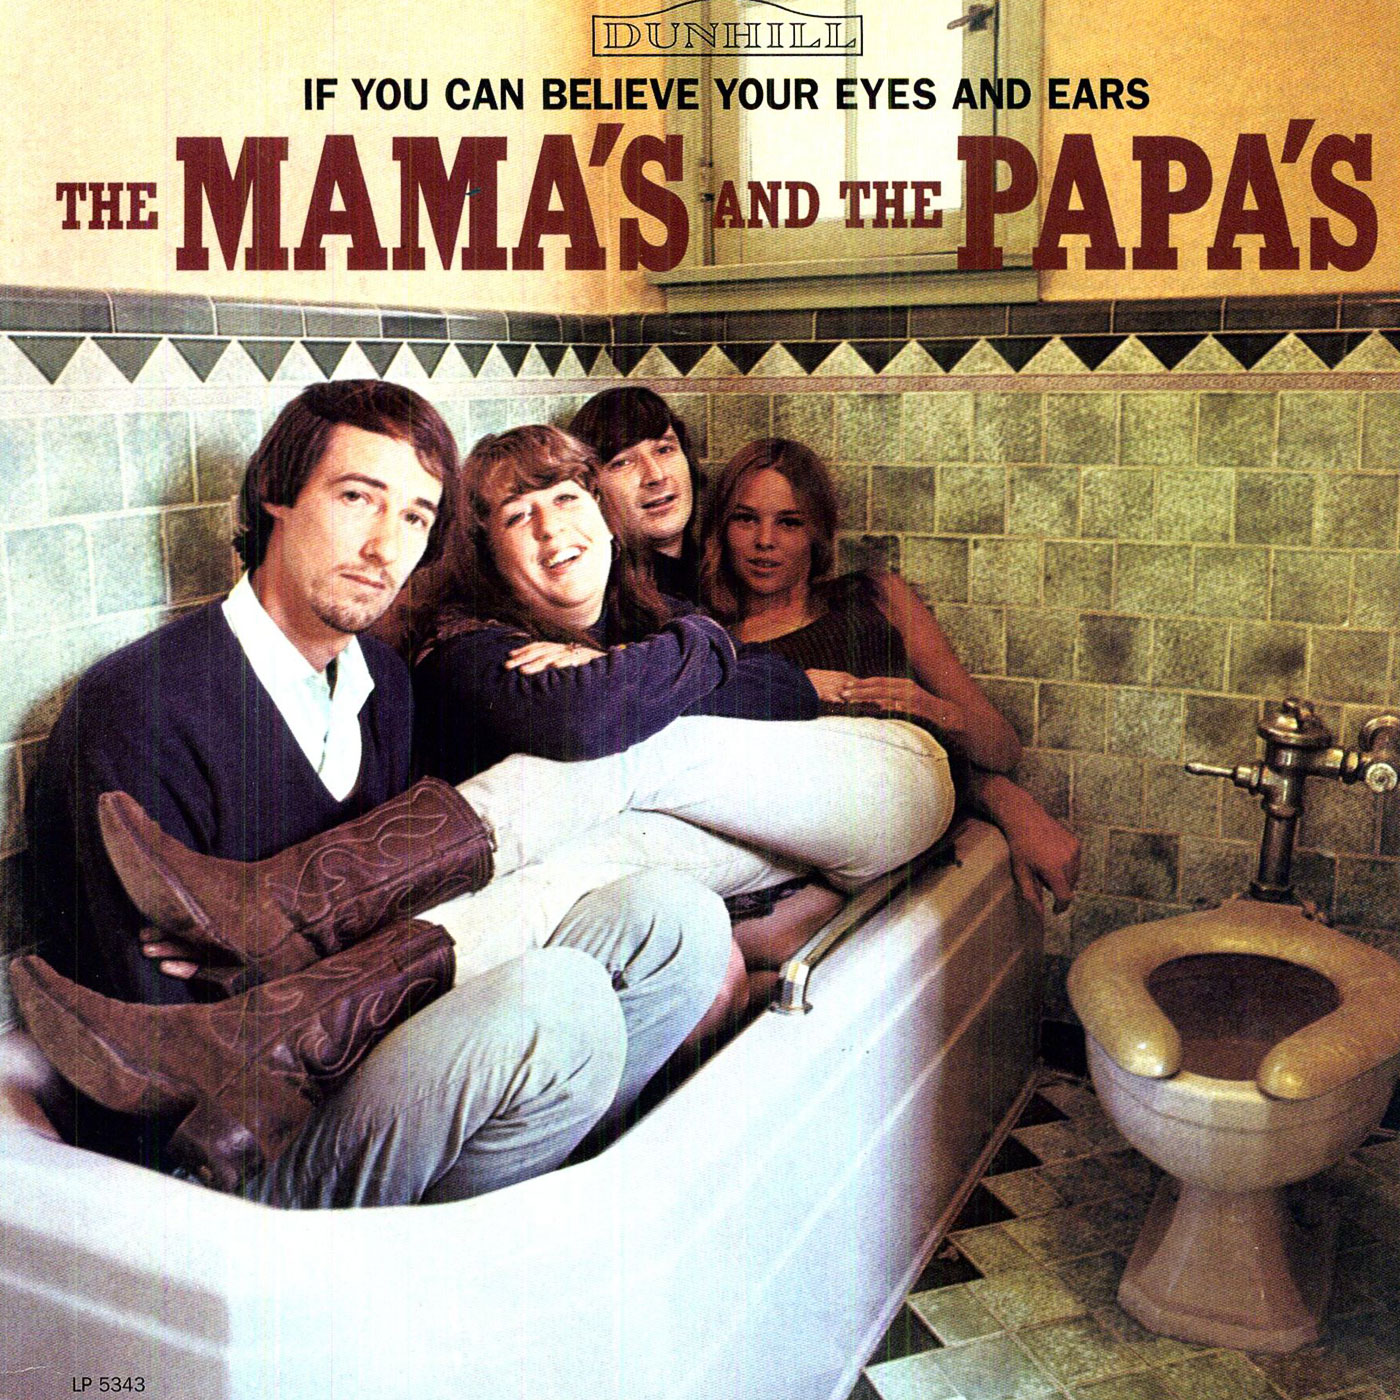 067 The Mama’s and the Papa’s – If You Can Believe Your Eyes and Ears